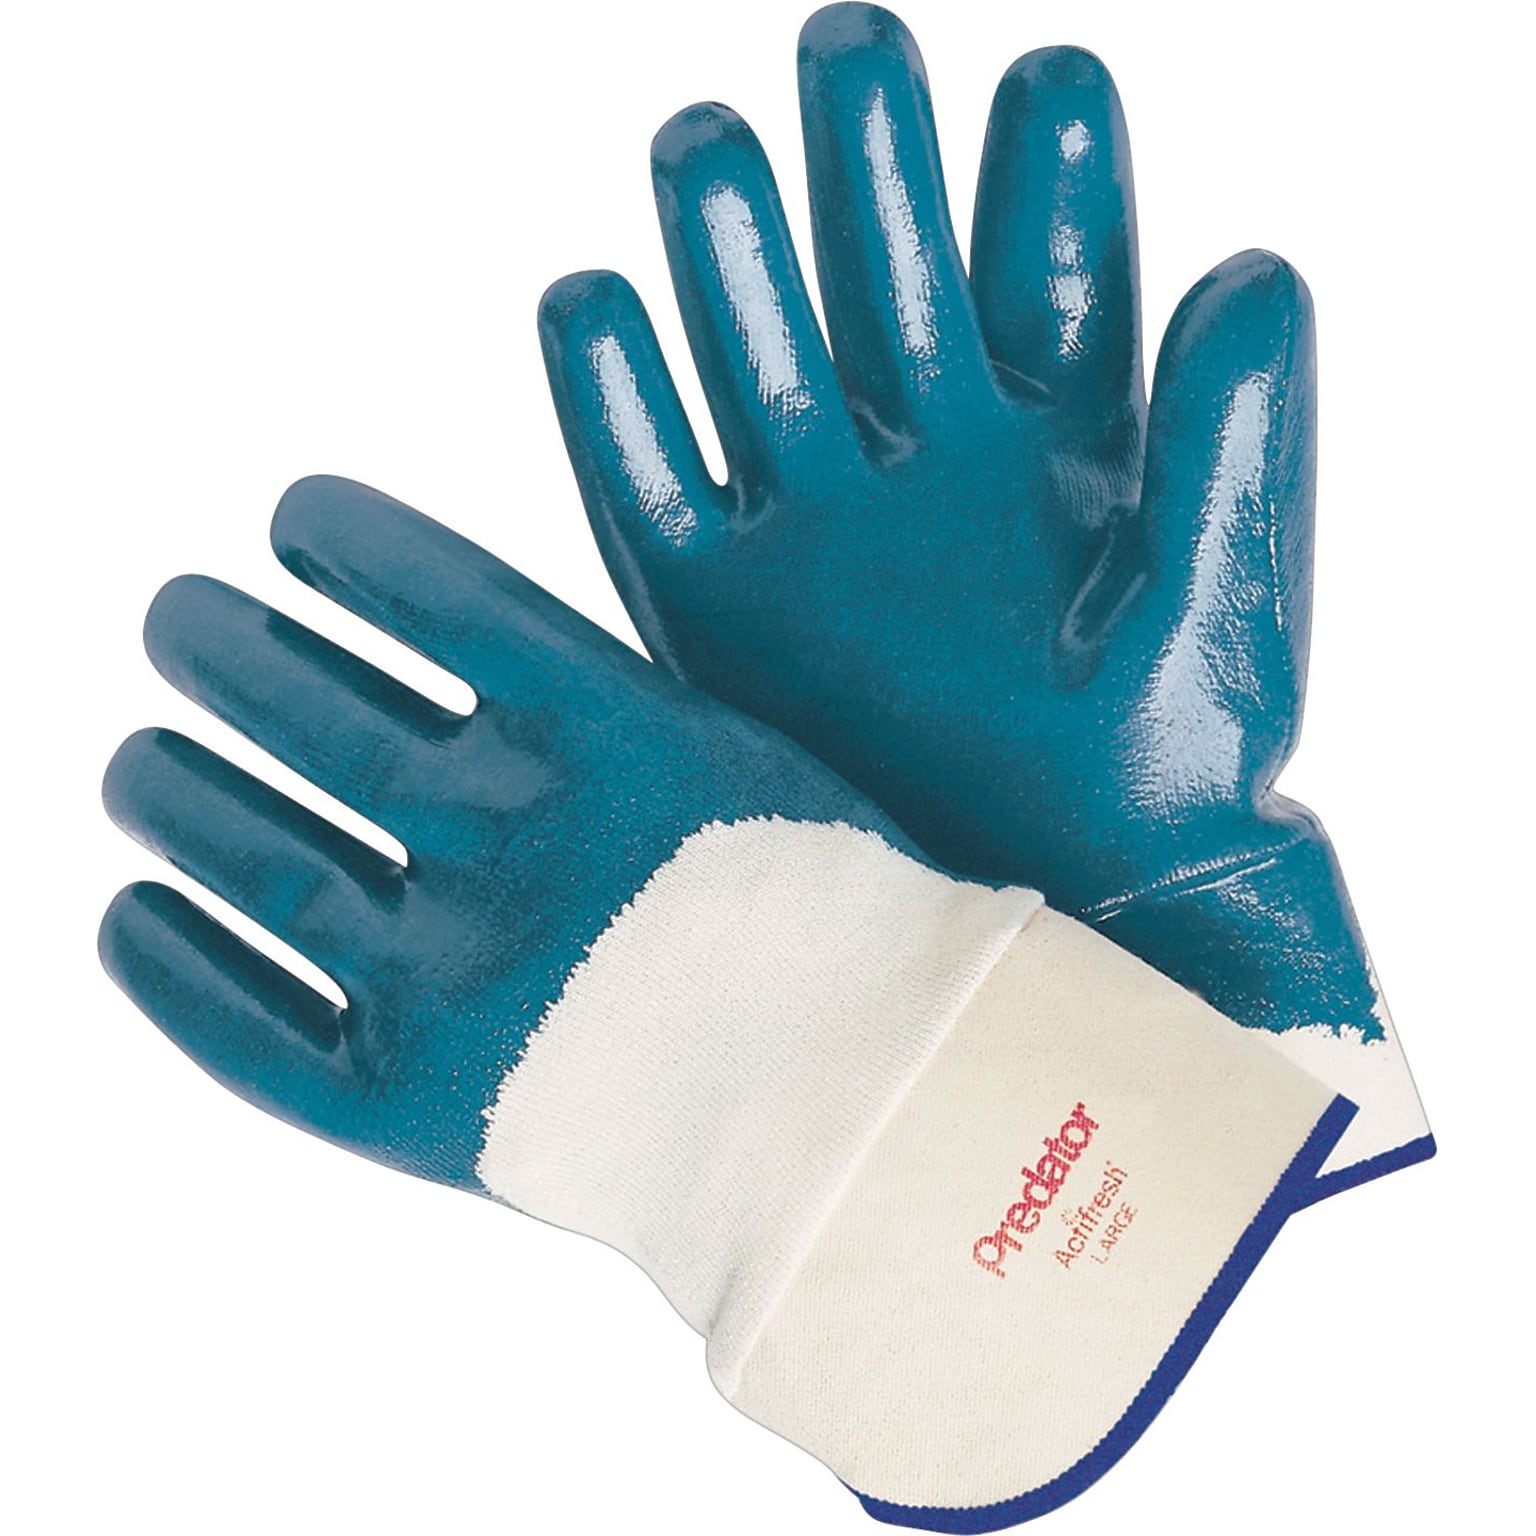 Memphis Gloves Predator Palm Coated Gloves, Nitrile, Lined Safety Cuff, L Size, Blue, 12 Pair/Box (9760L)